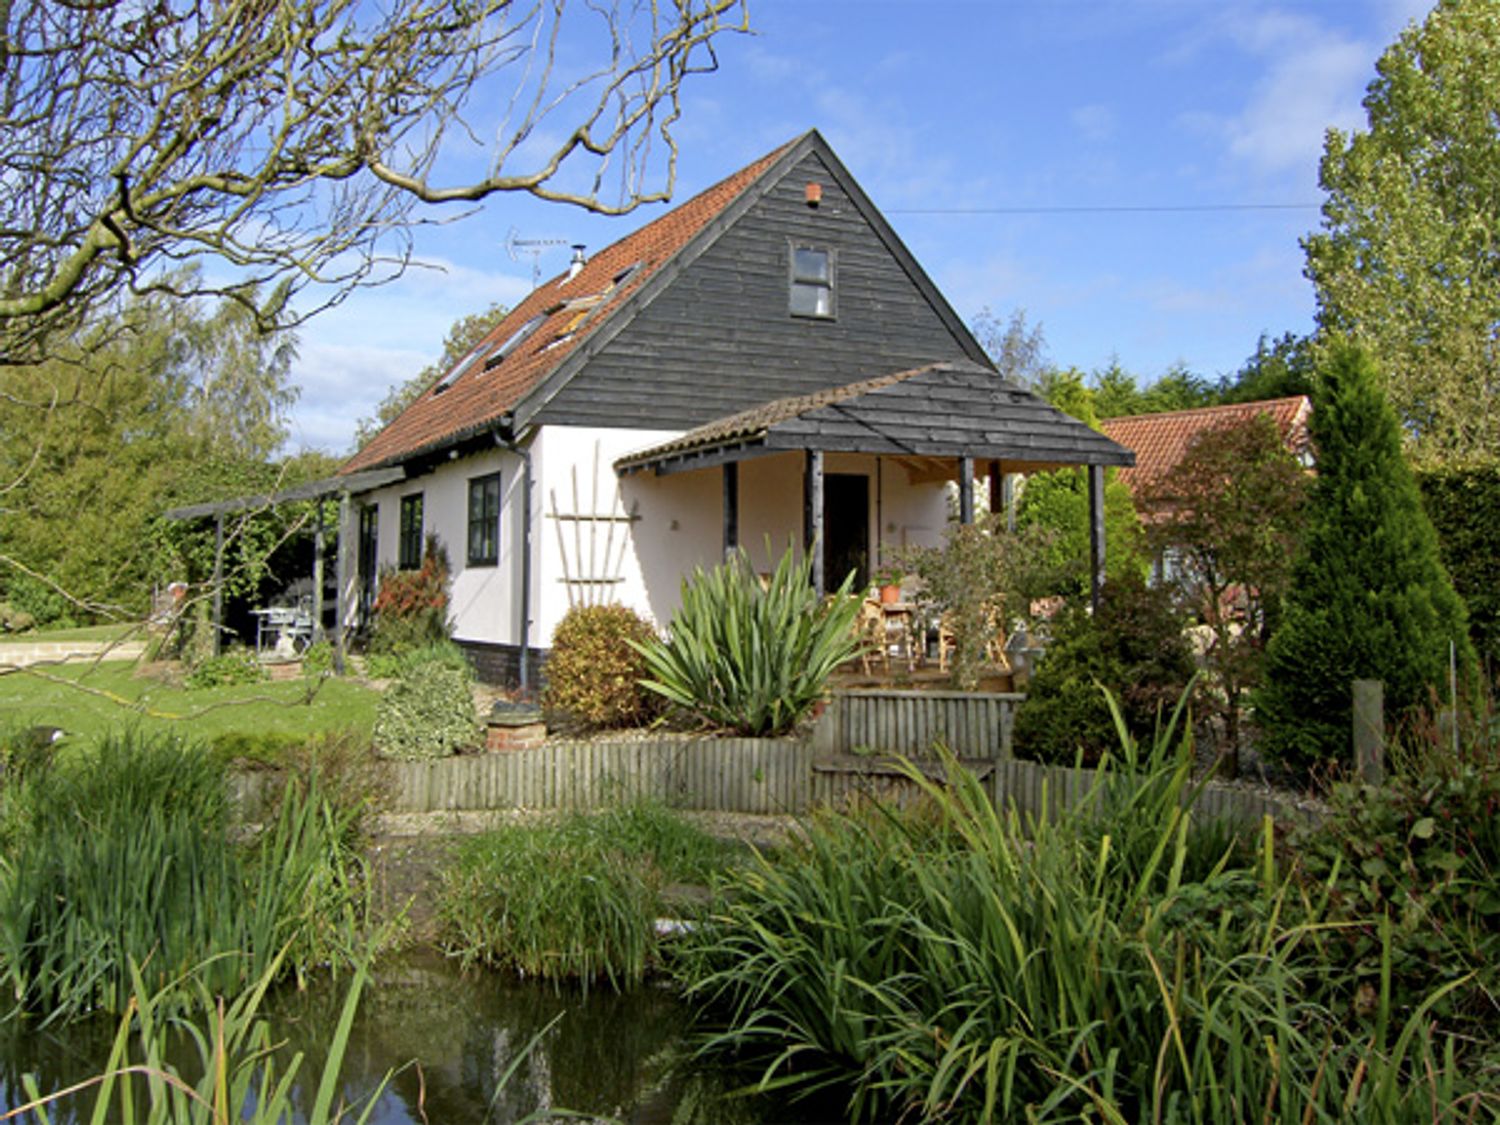 Holiday Cottages in Norfolk: The Haybarn, Necton nr. Swaffham | sykescottages.co.uk